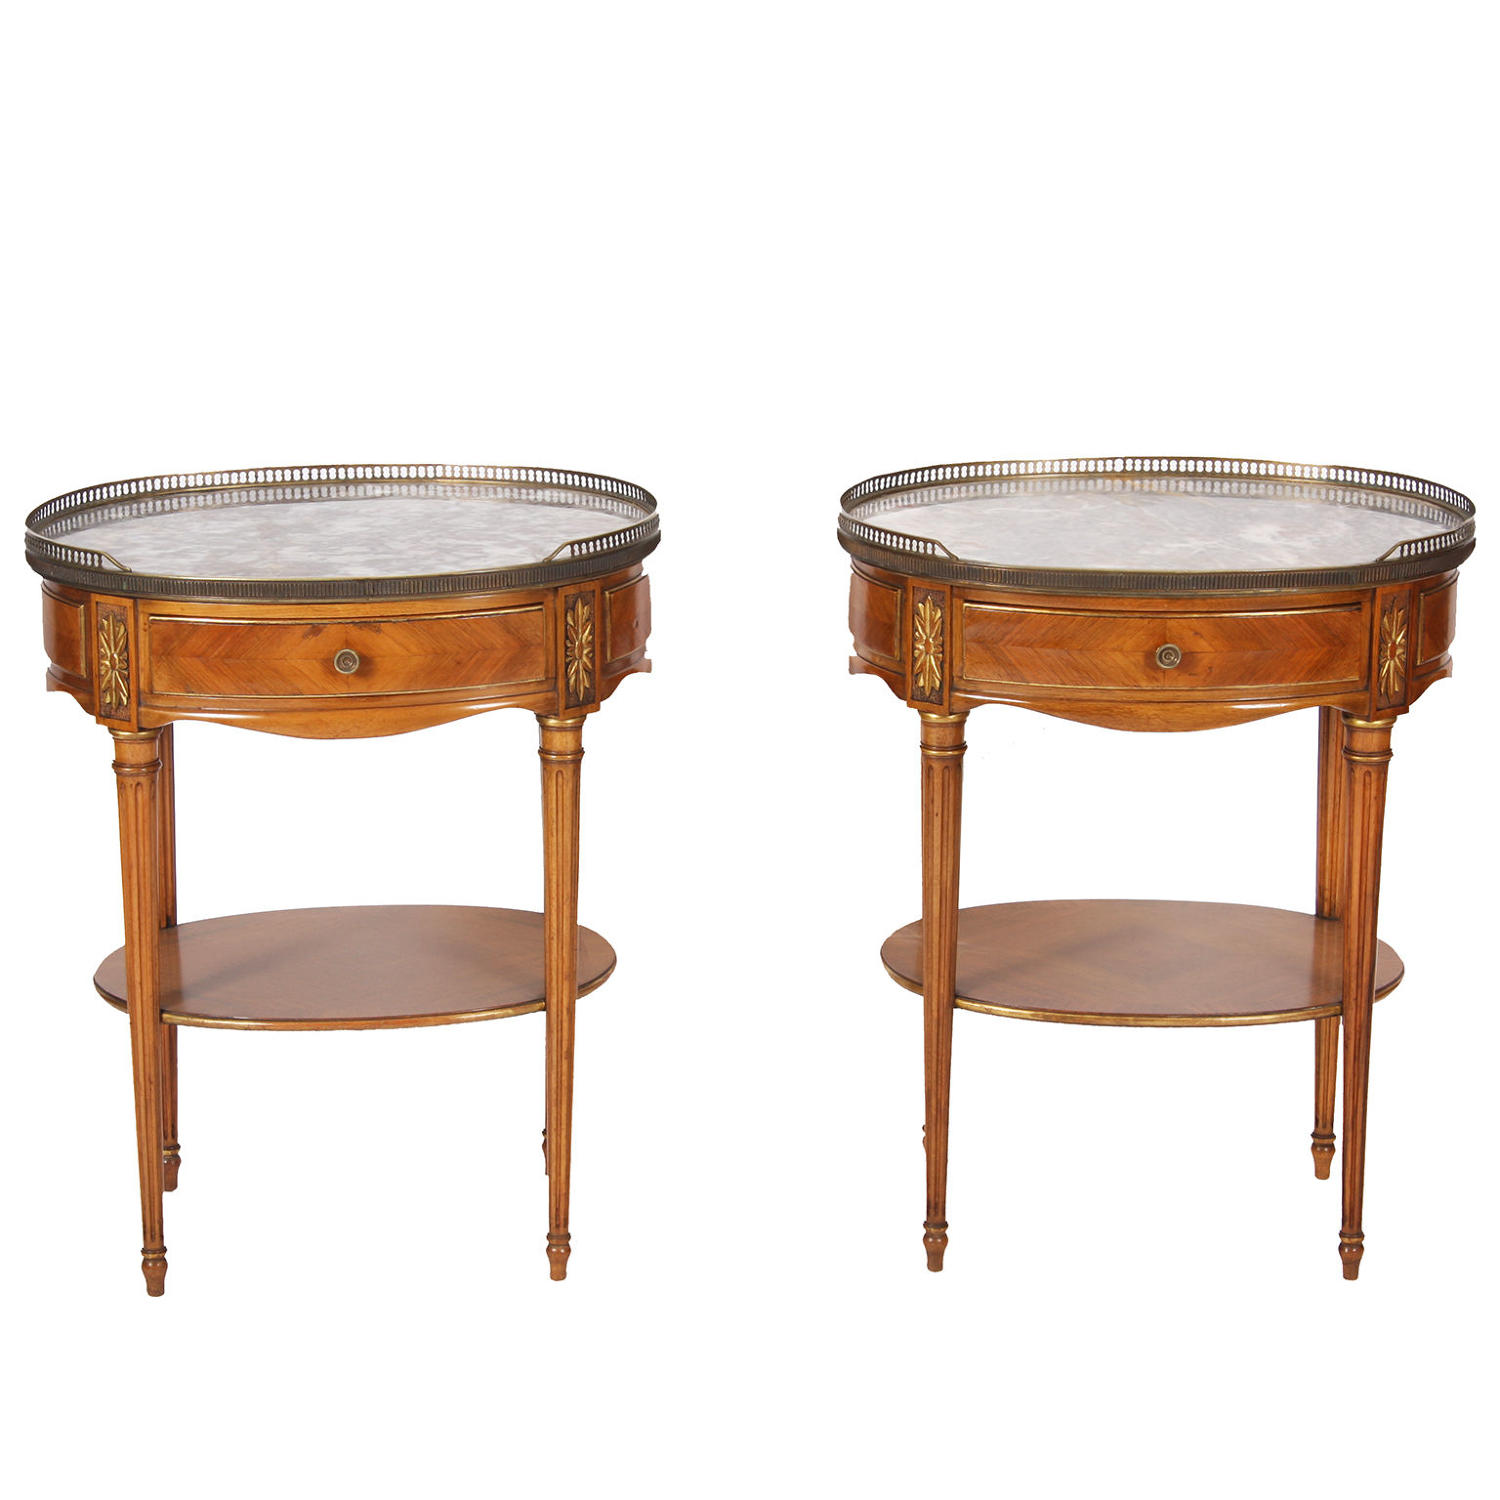 Pair of Fruitwood Bedside Tables